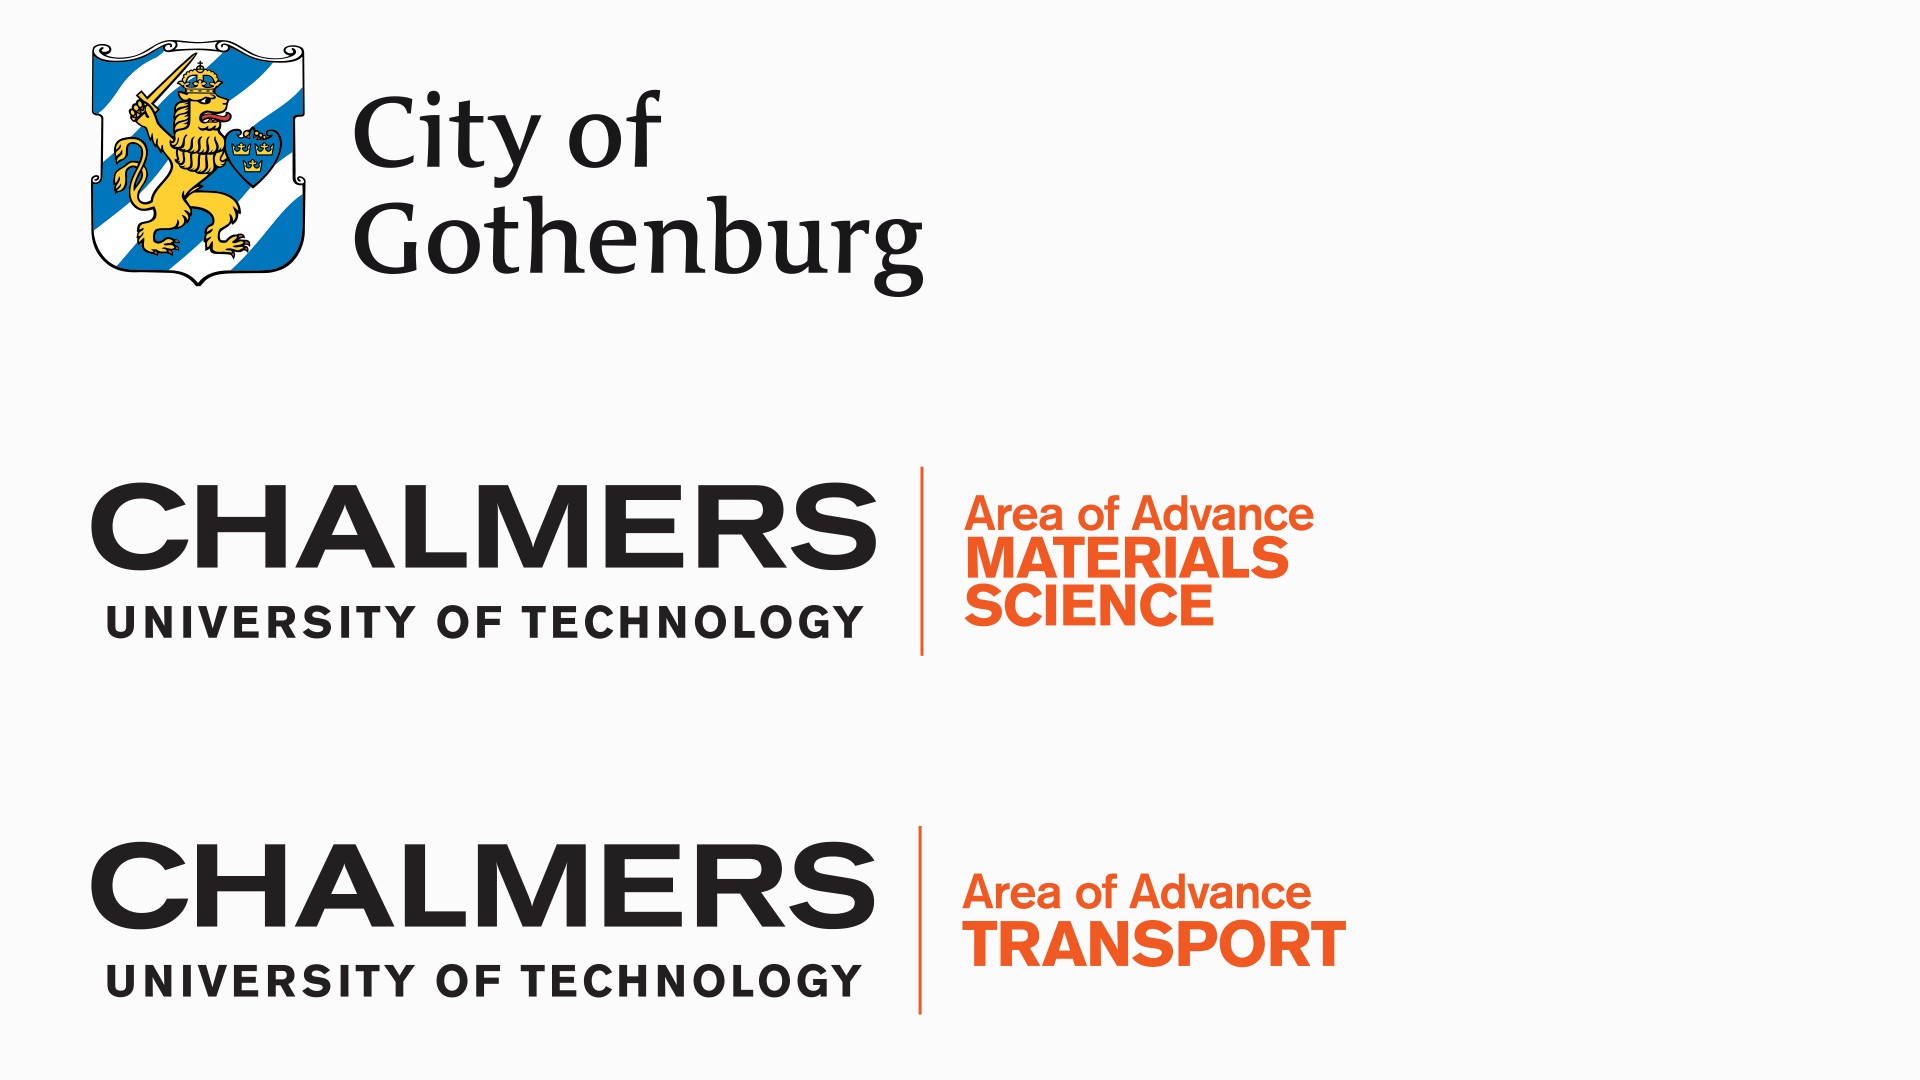 The logotypes of the conference sponsors: Göteborgs stad and Chalmers Materials Science Area of Advance.